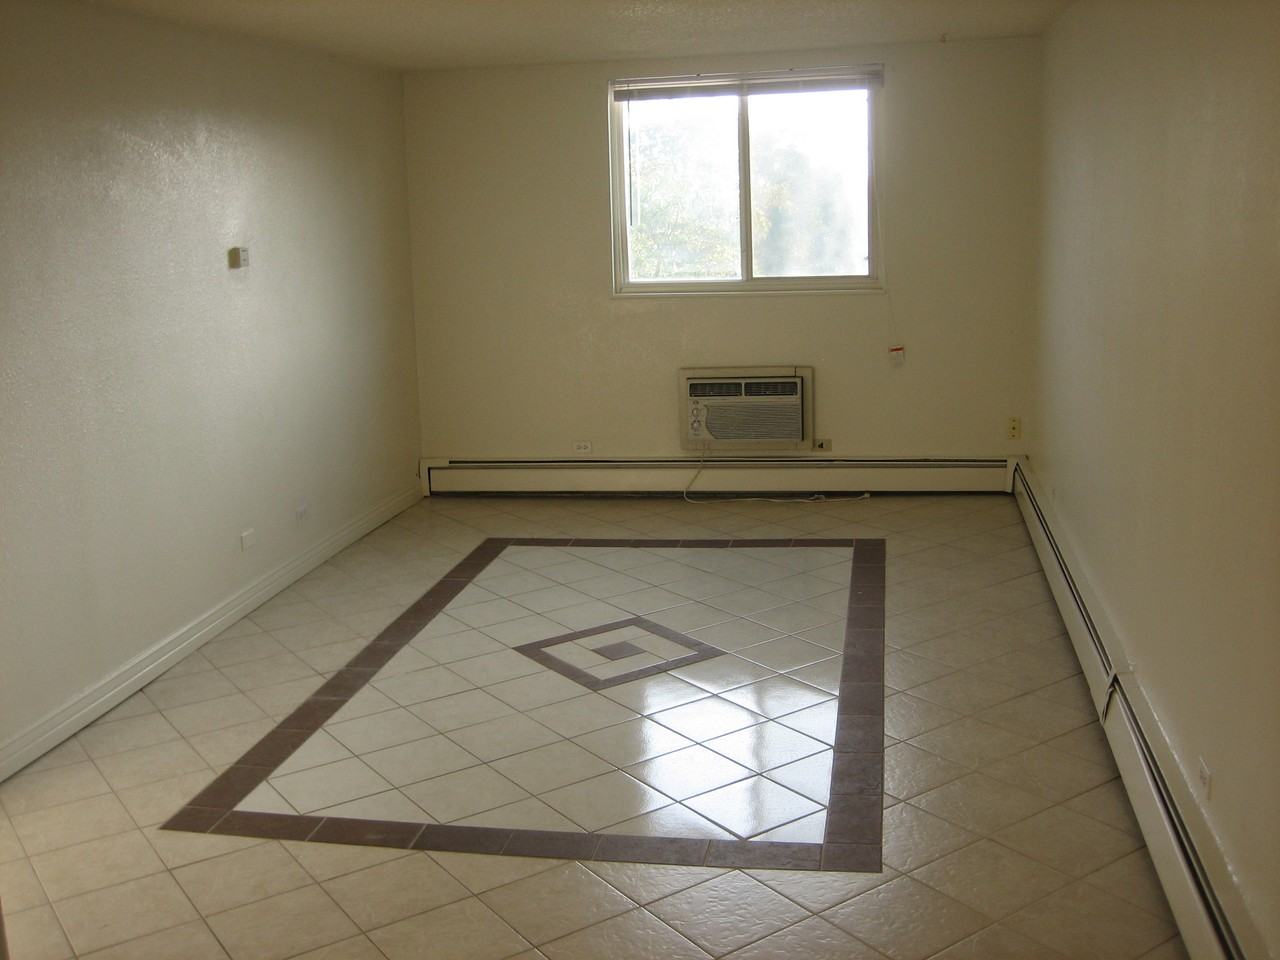 8925 Corona St 302 Thornton Co 80229 2 Bedroom Apartment For Rent For 565 Month Zumper